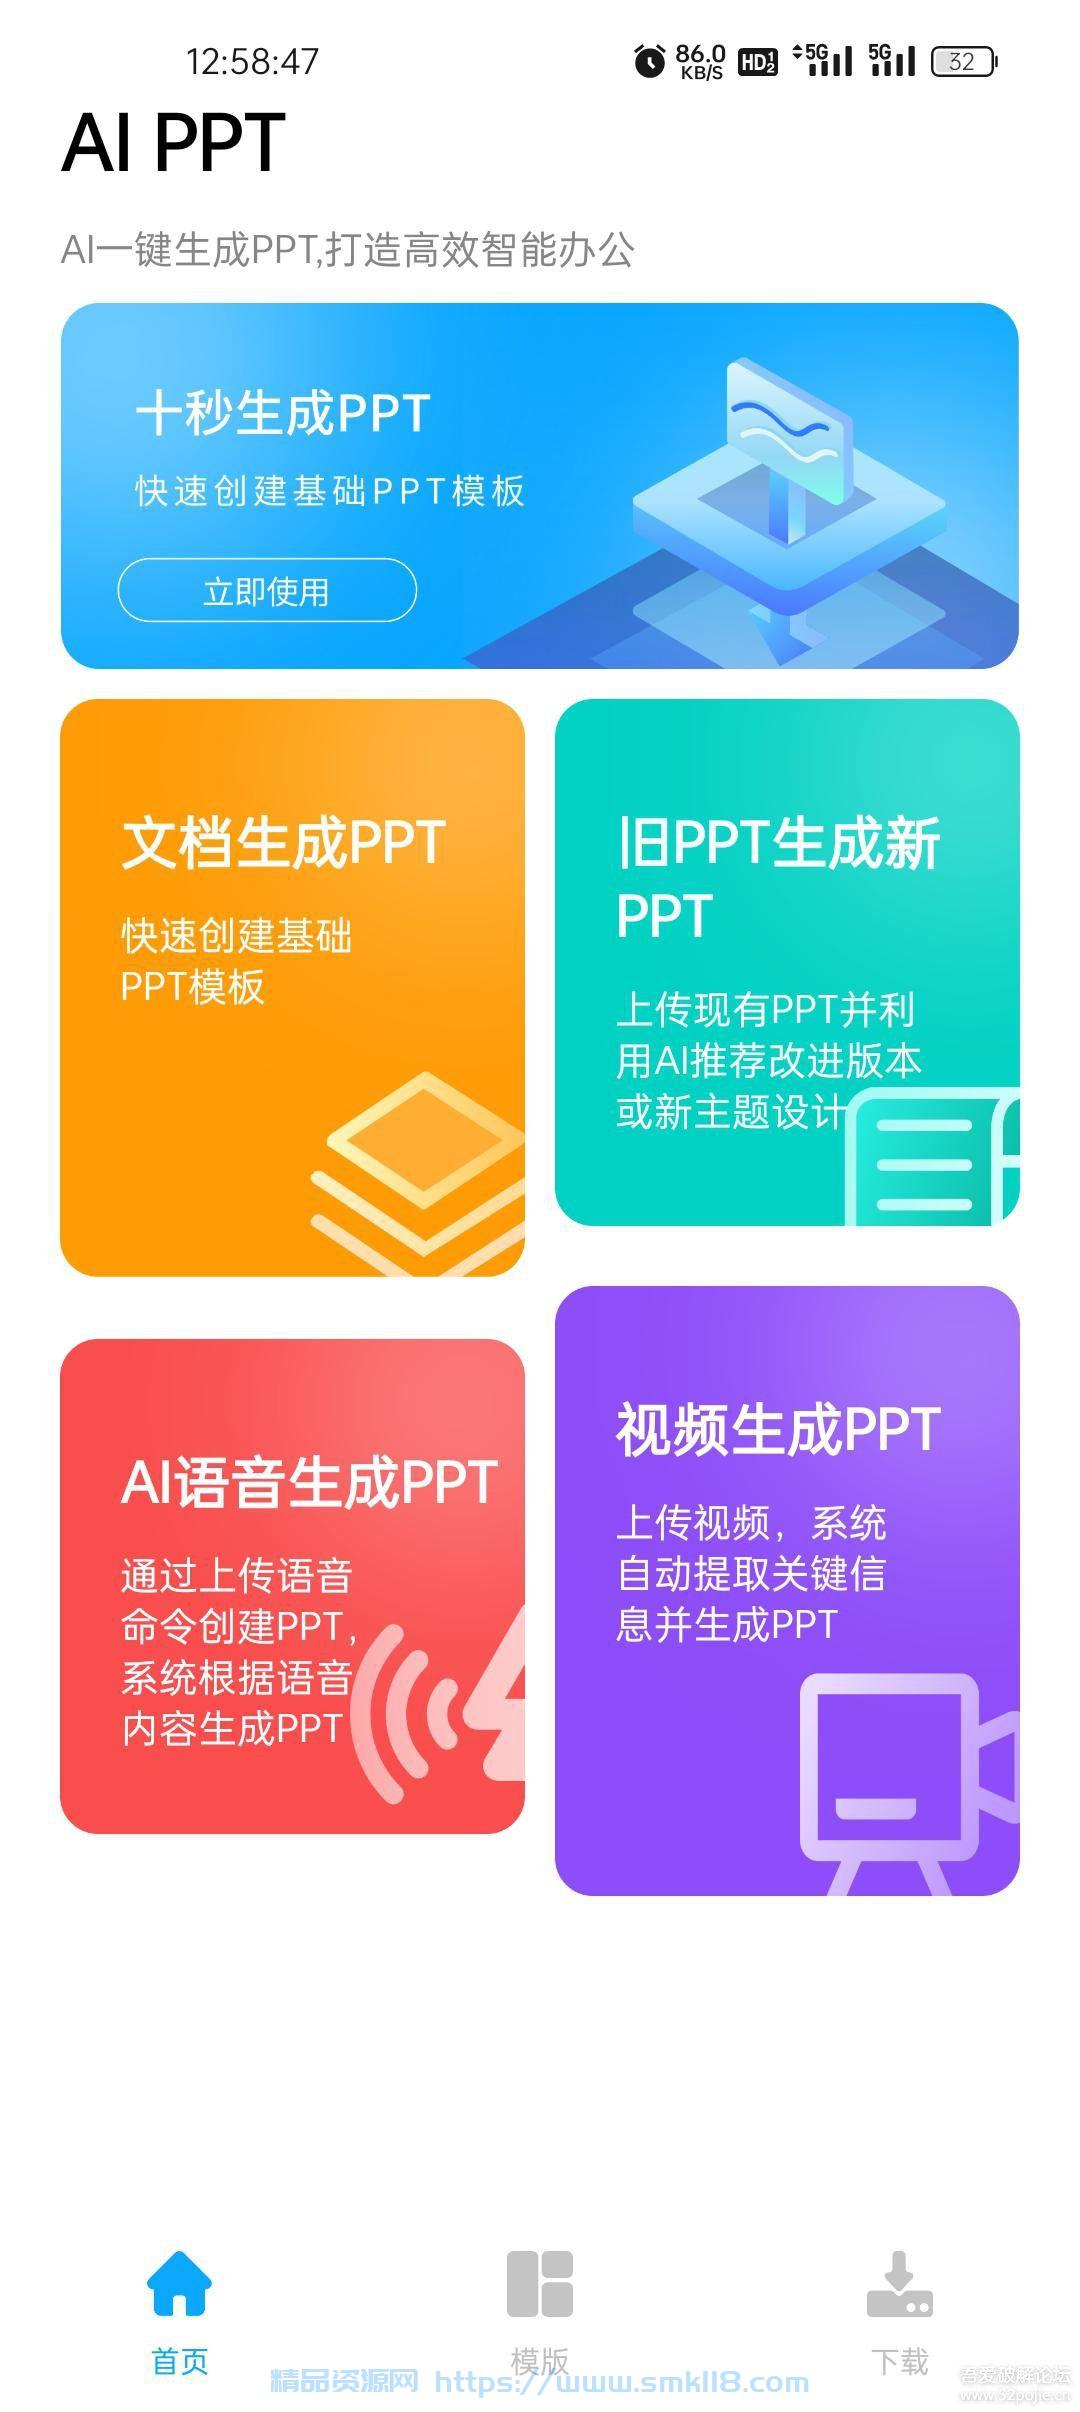 [Android] AI PPT生成工具 V1.0.0 